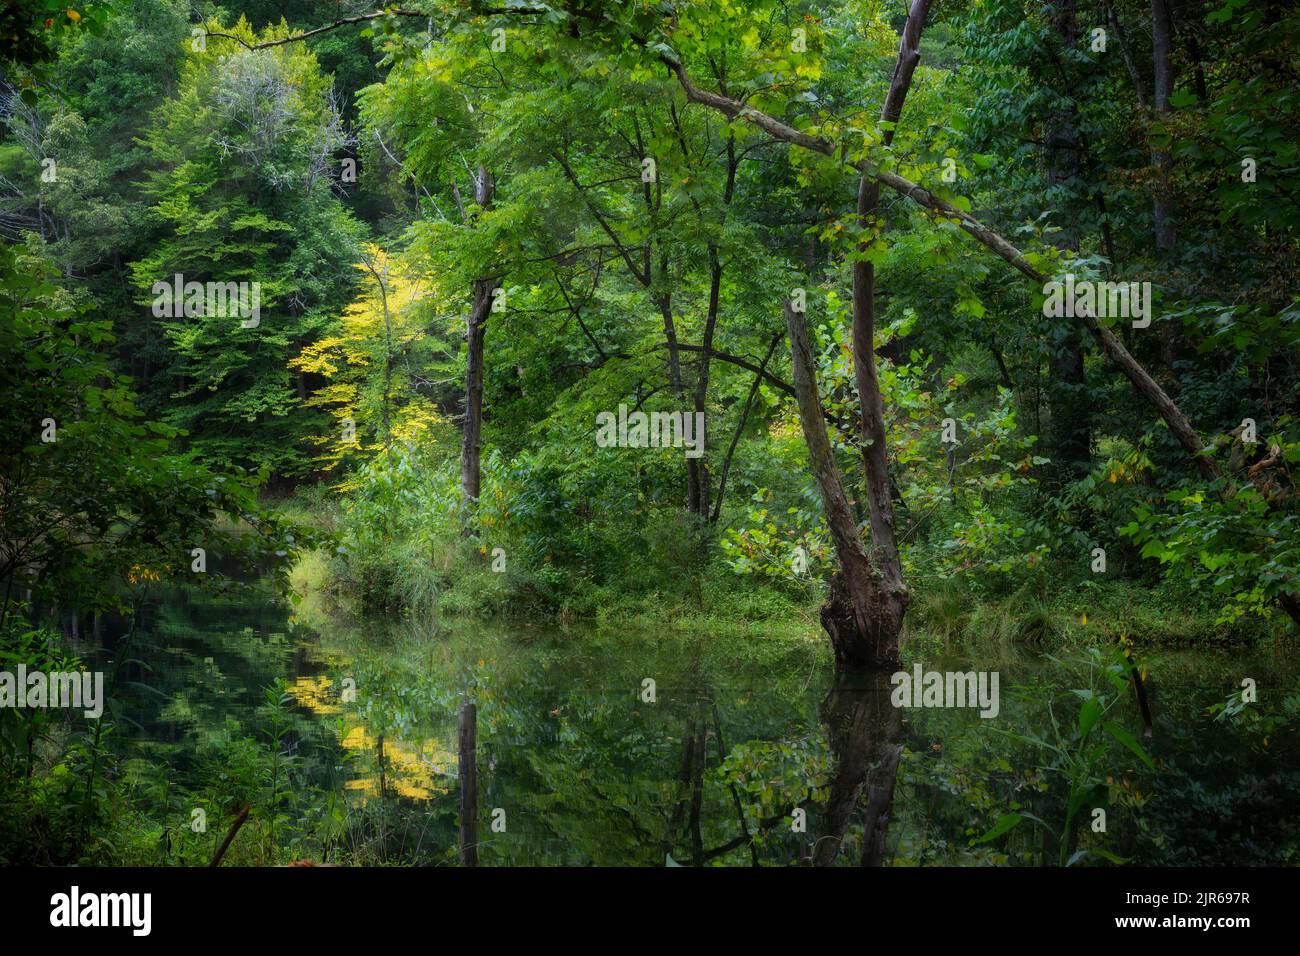 Beauty in nature a tranquil scene with still water refrecting the wooded area around it. Stock Photo